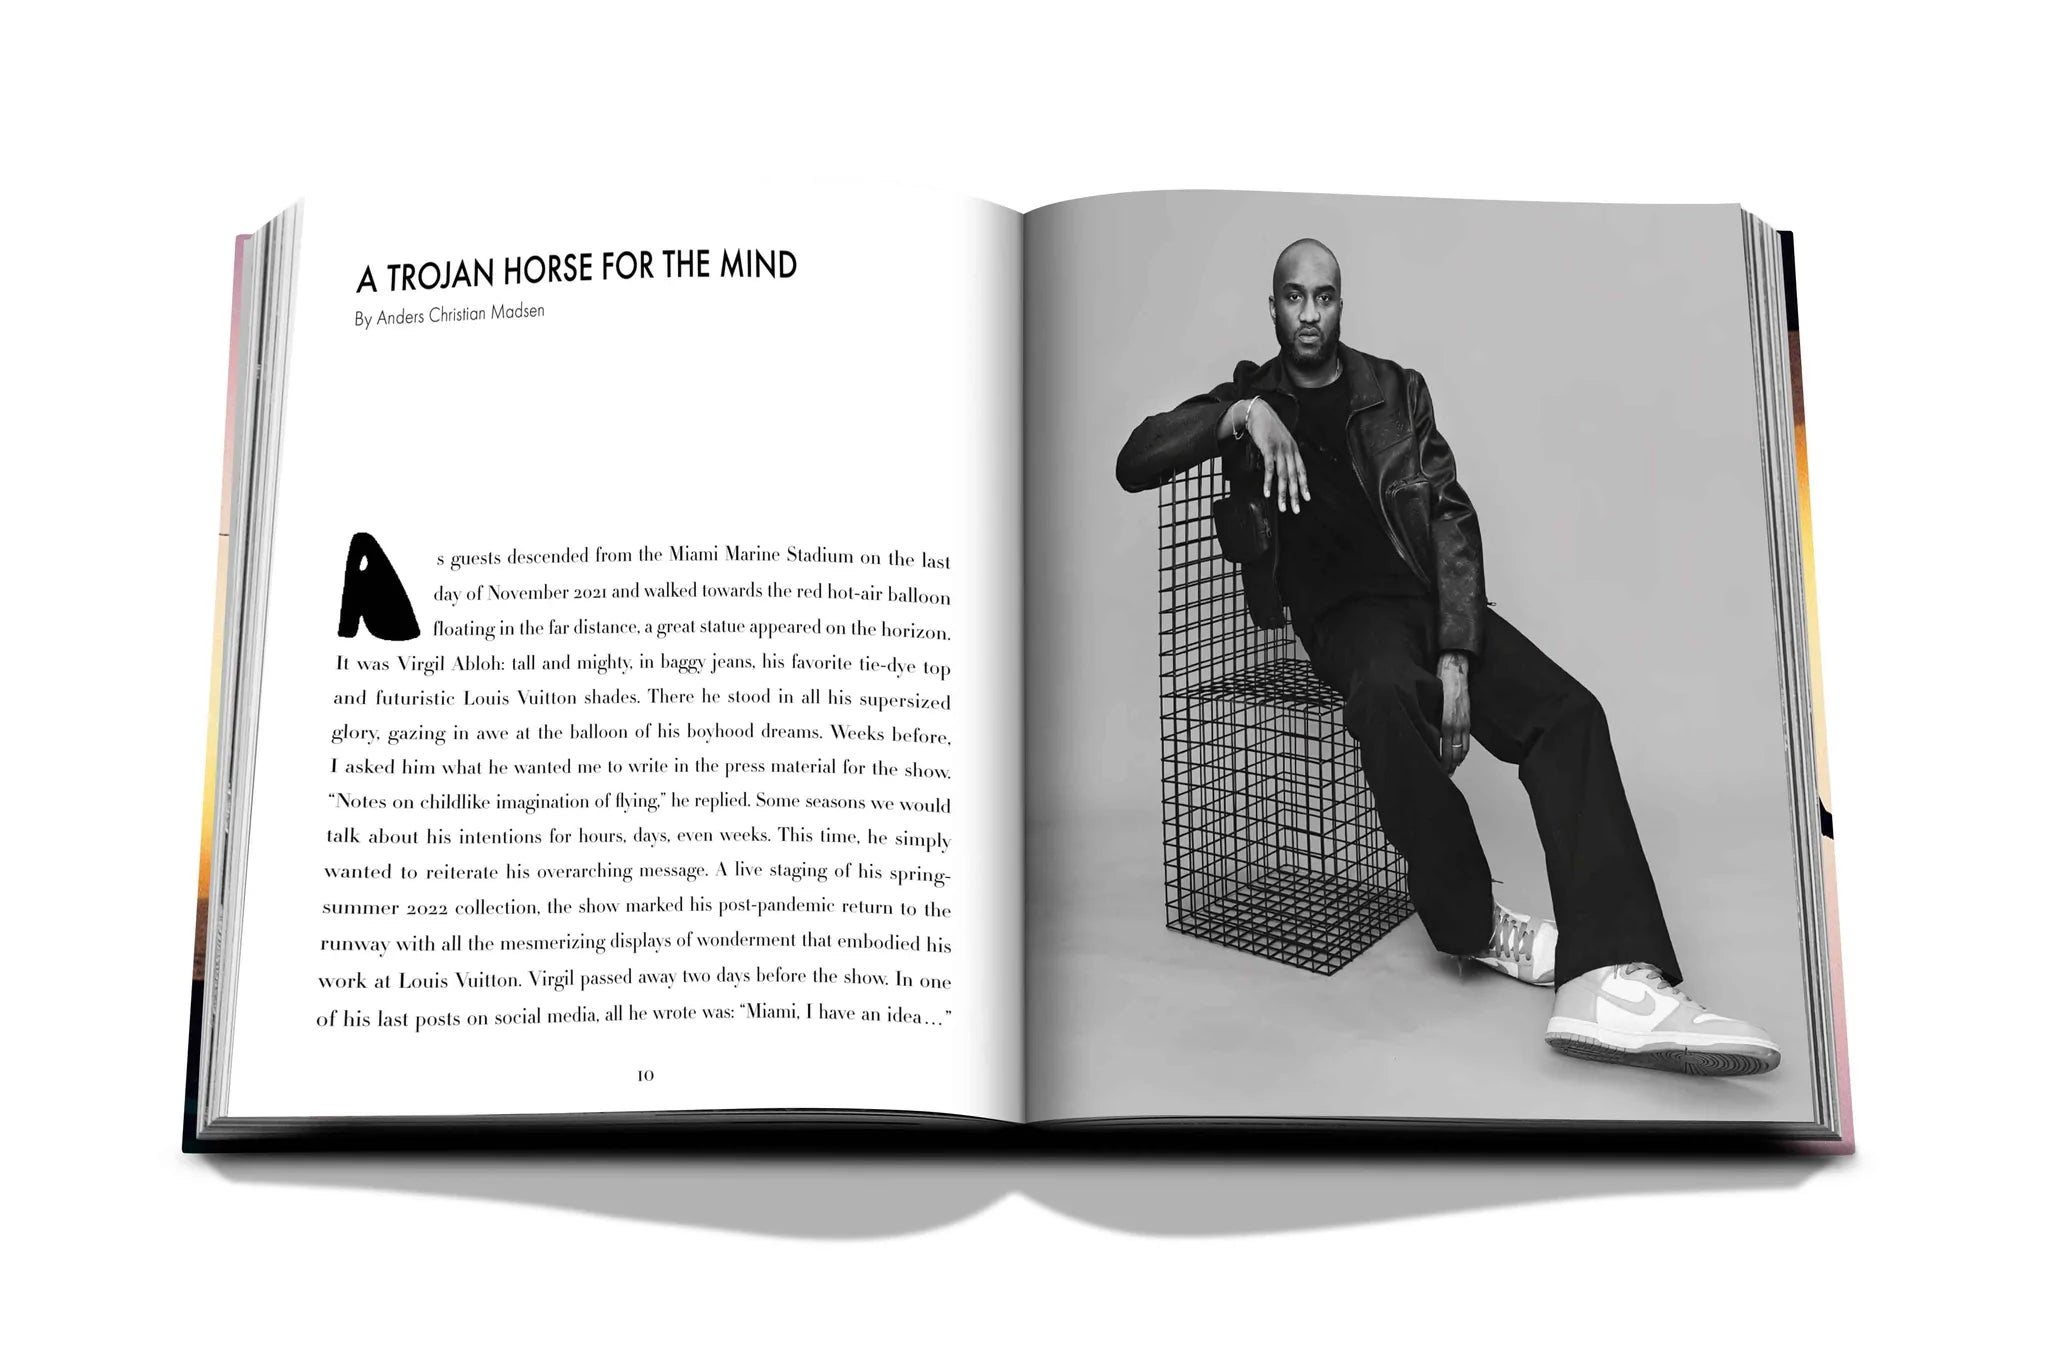 Louis Vuitton on X: Imagining the impossible. @VirgilAbloh's